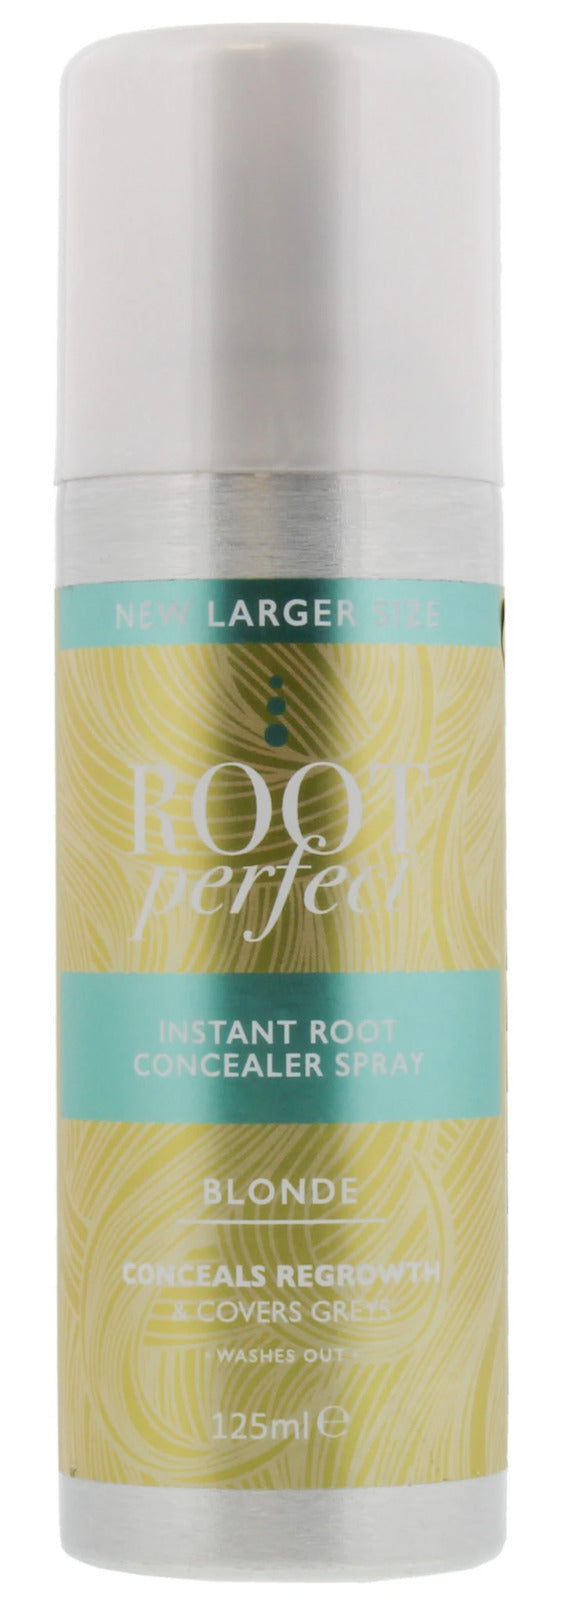 Hair Root Perfect: Instant Root Concealer Spray - Blonde (125ml)